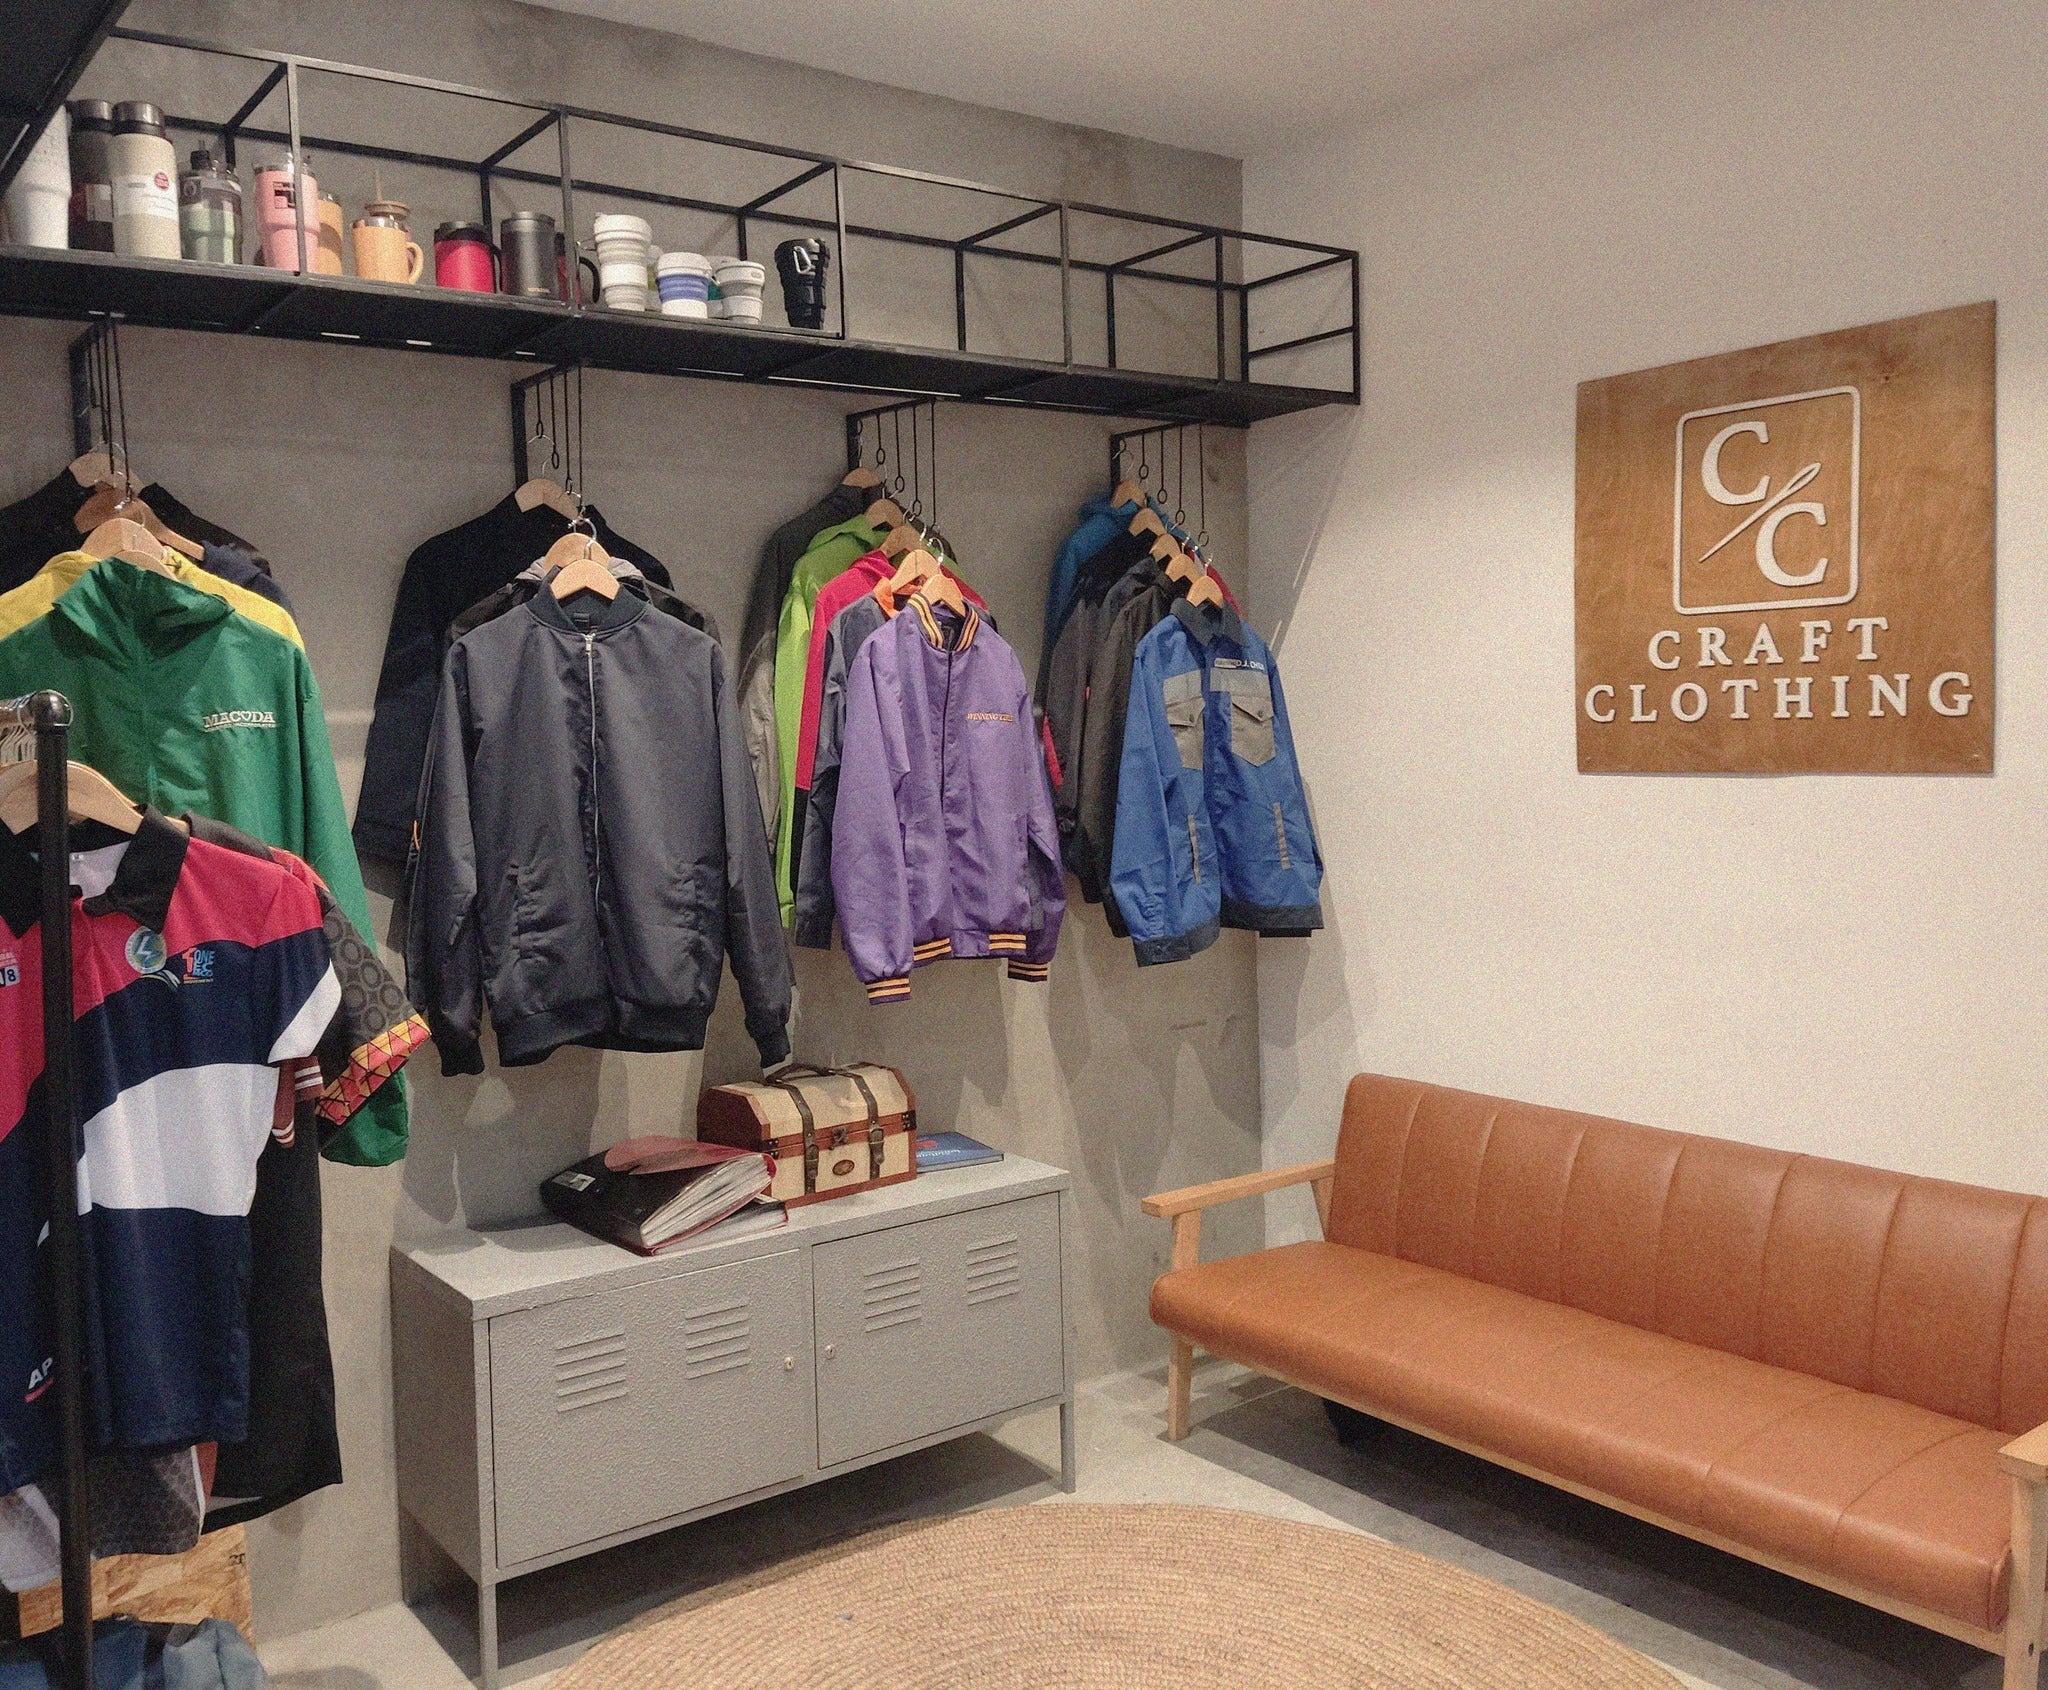 Check out Craft Clothing’s showroom